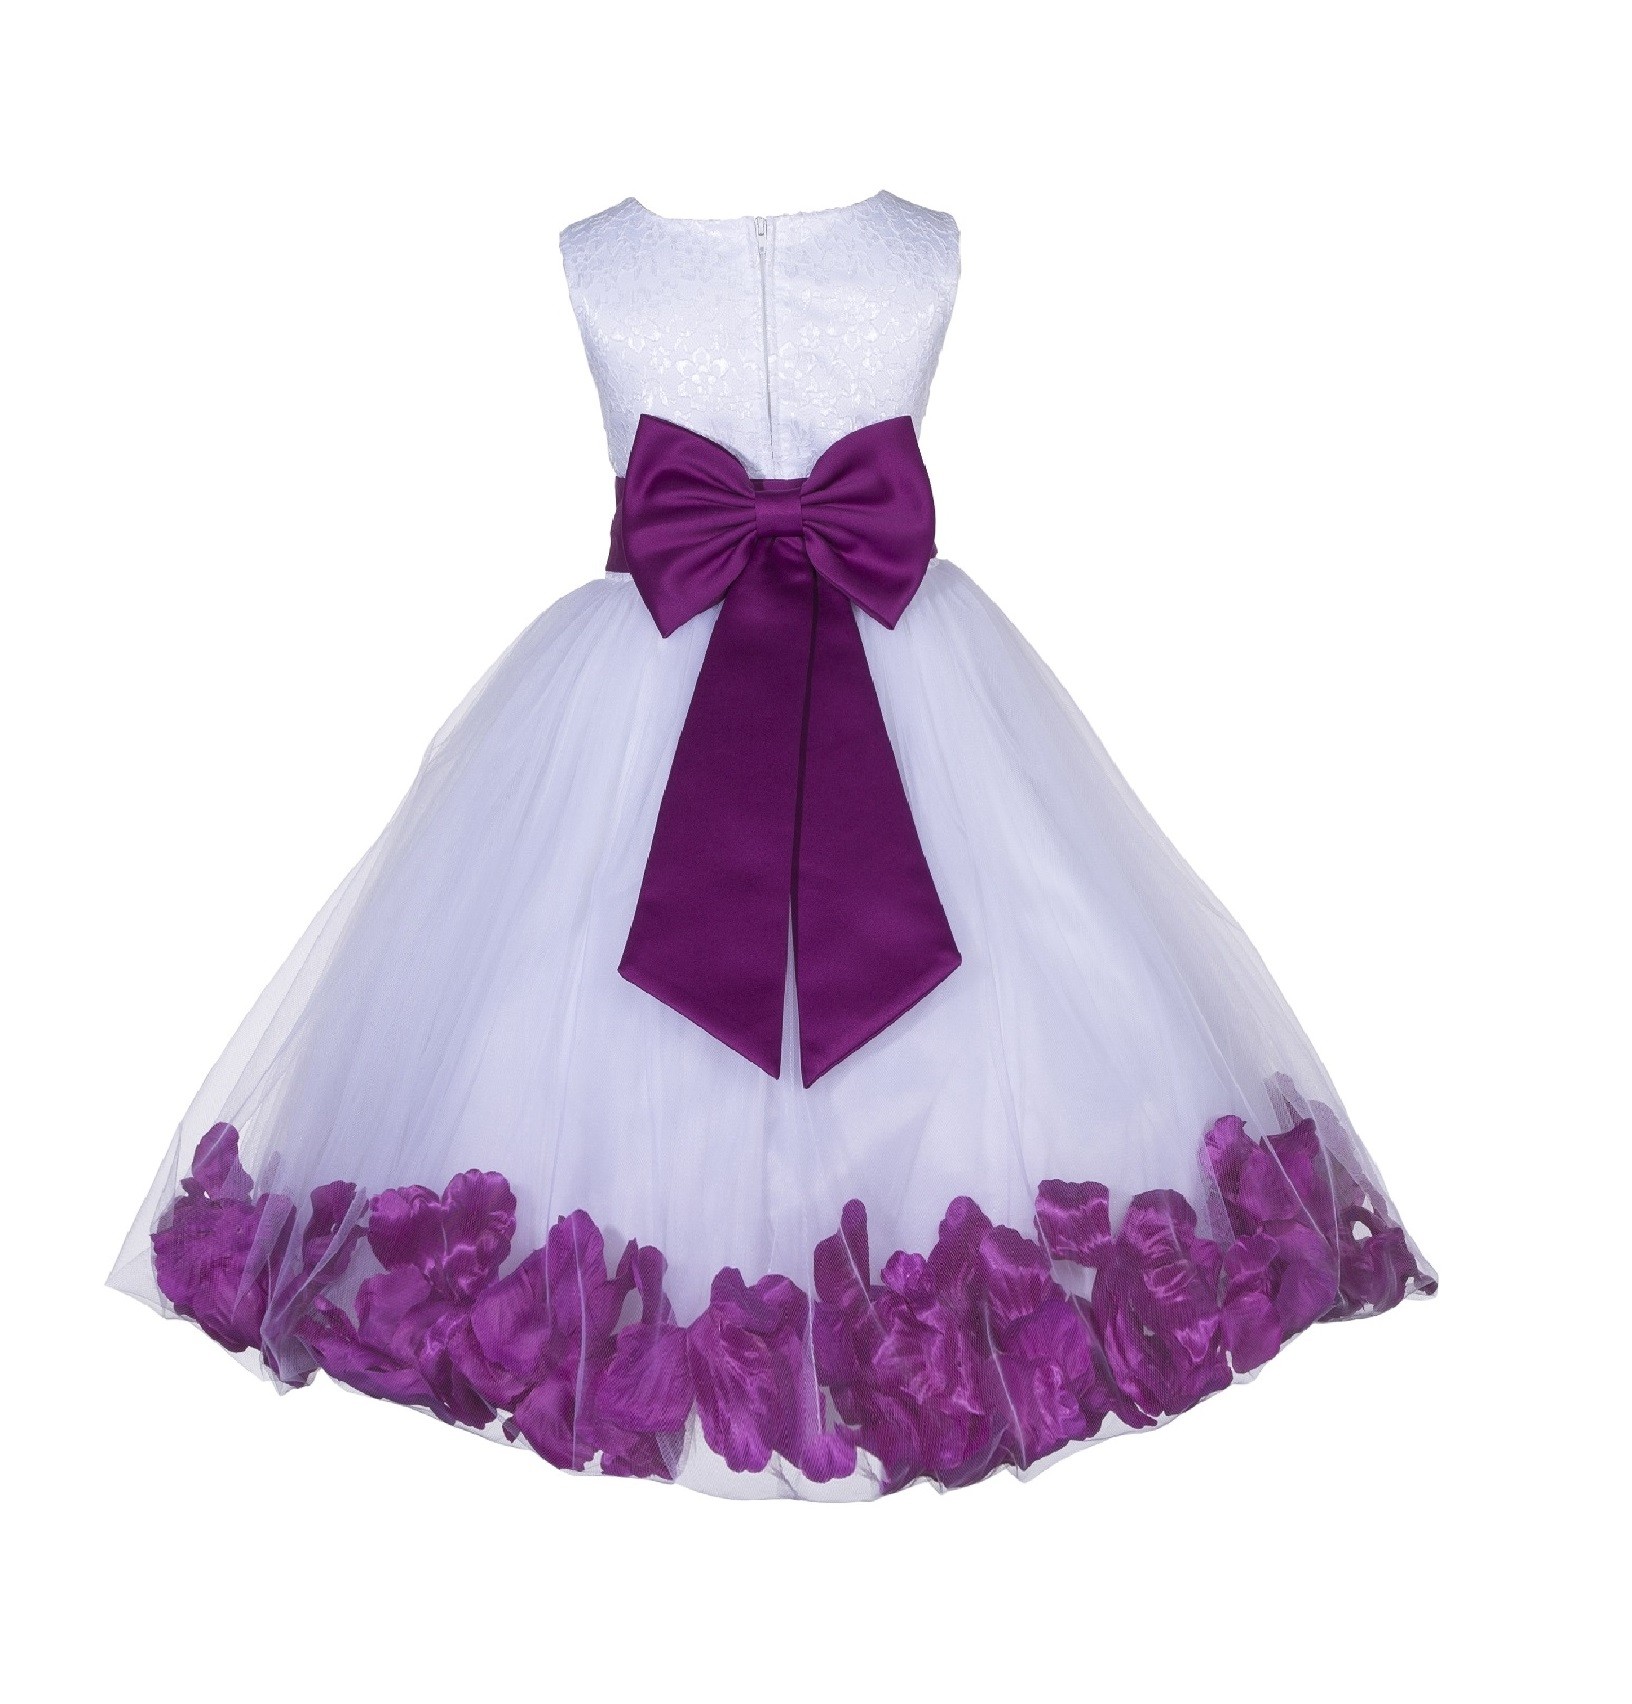 White/Raspberry Lace Top Tulle Floral Petals Flower Girl Dress 165T